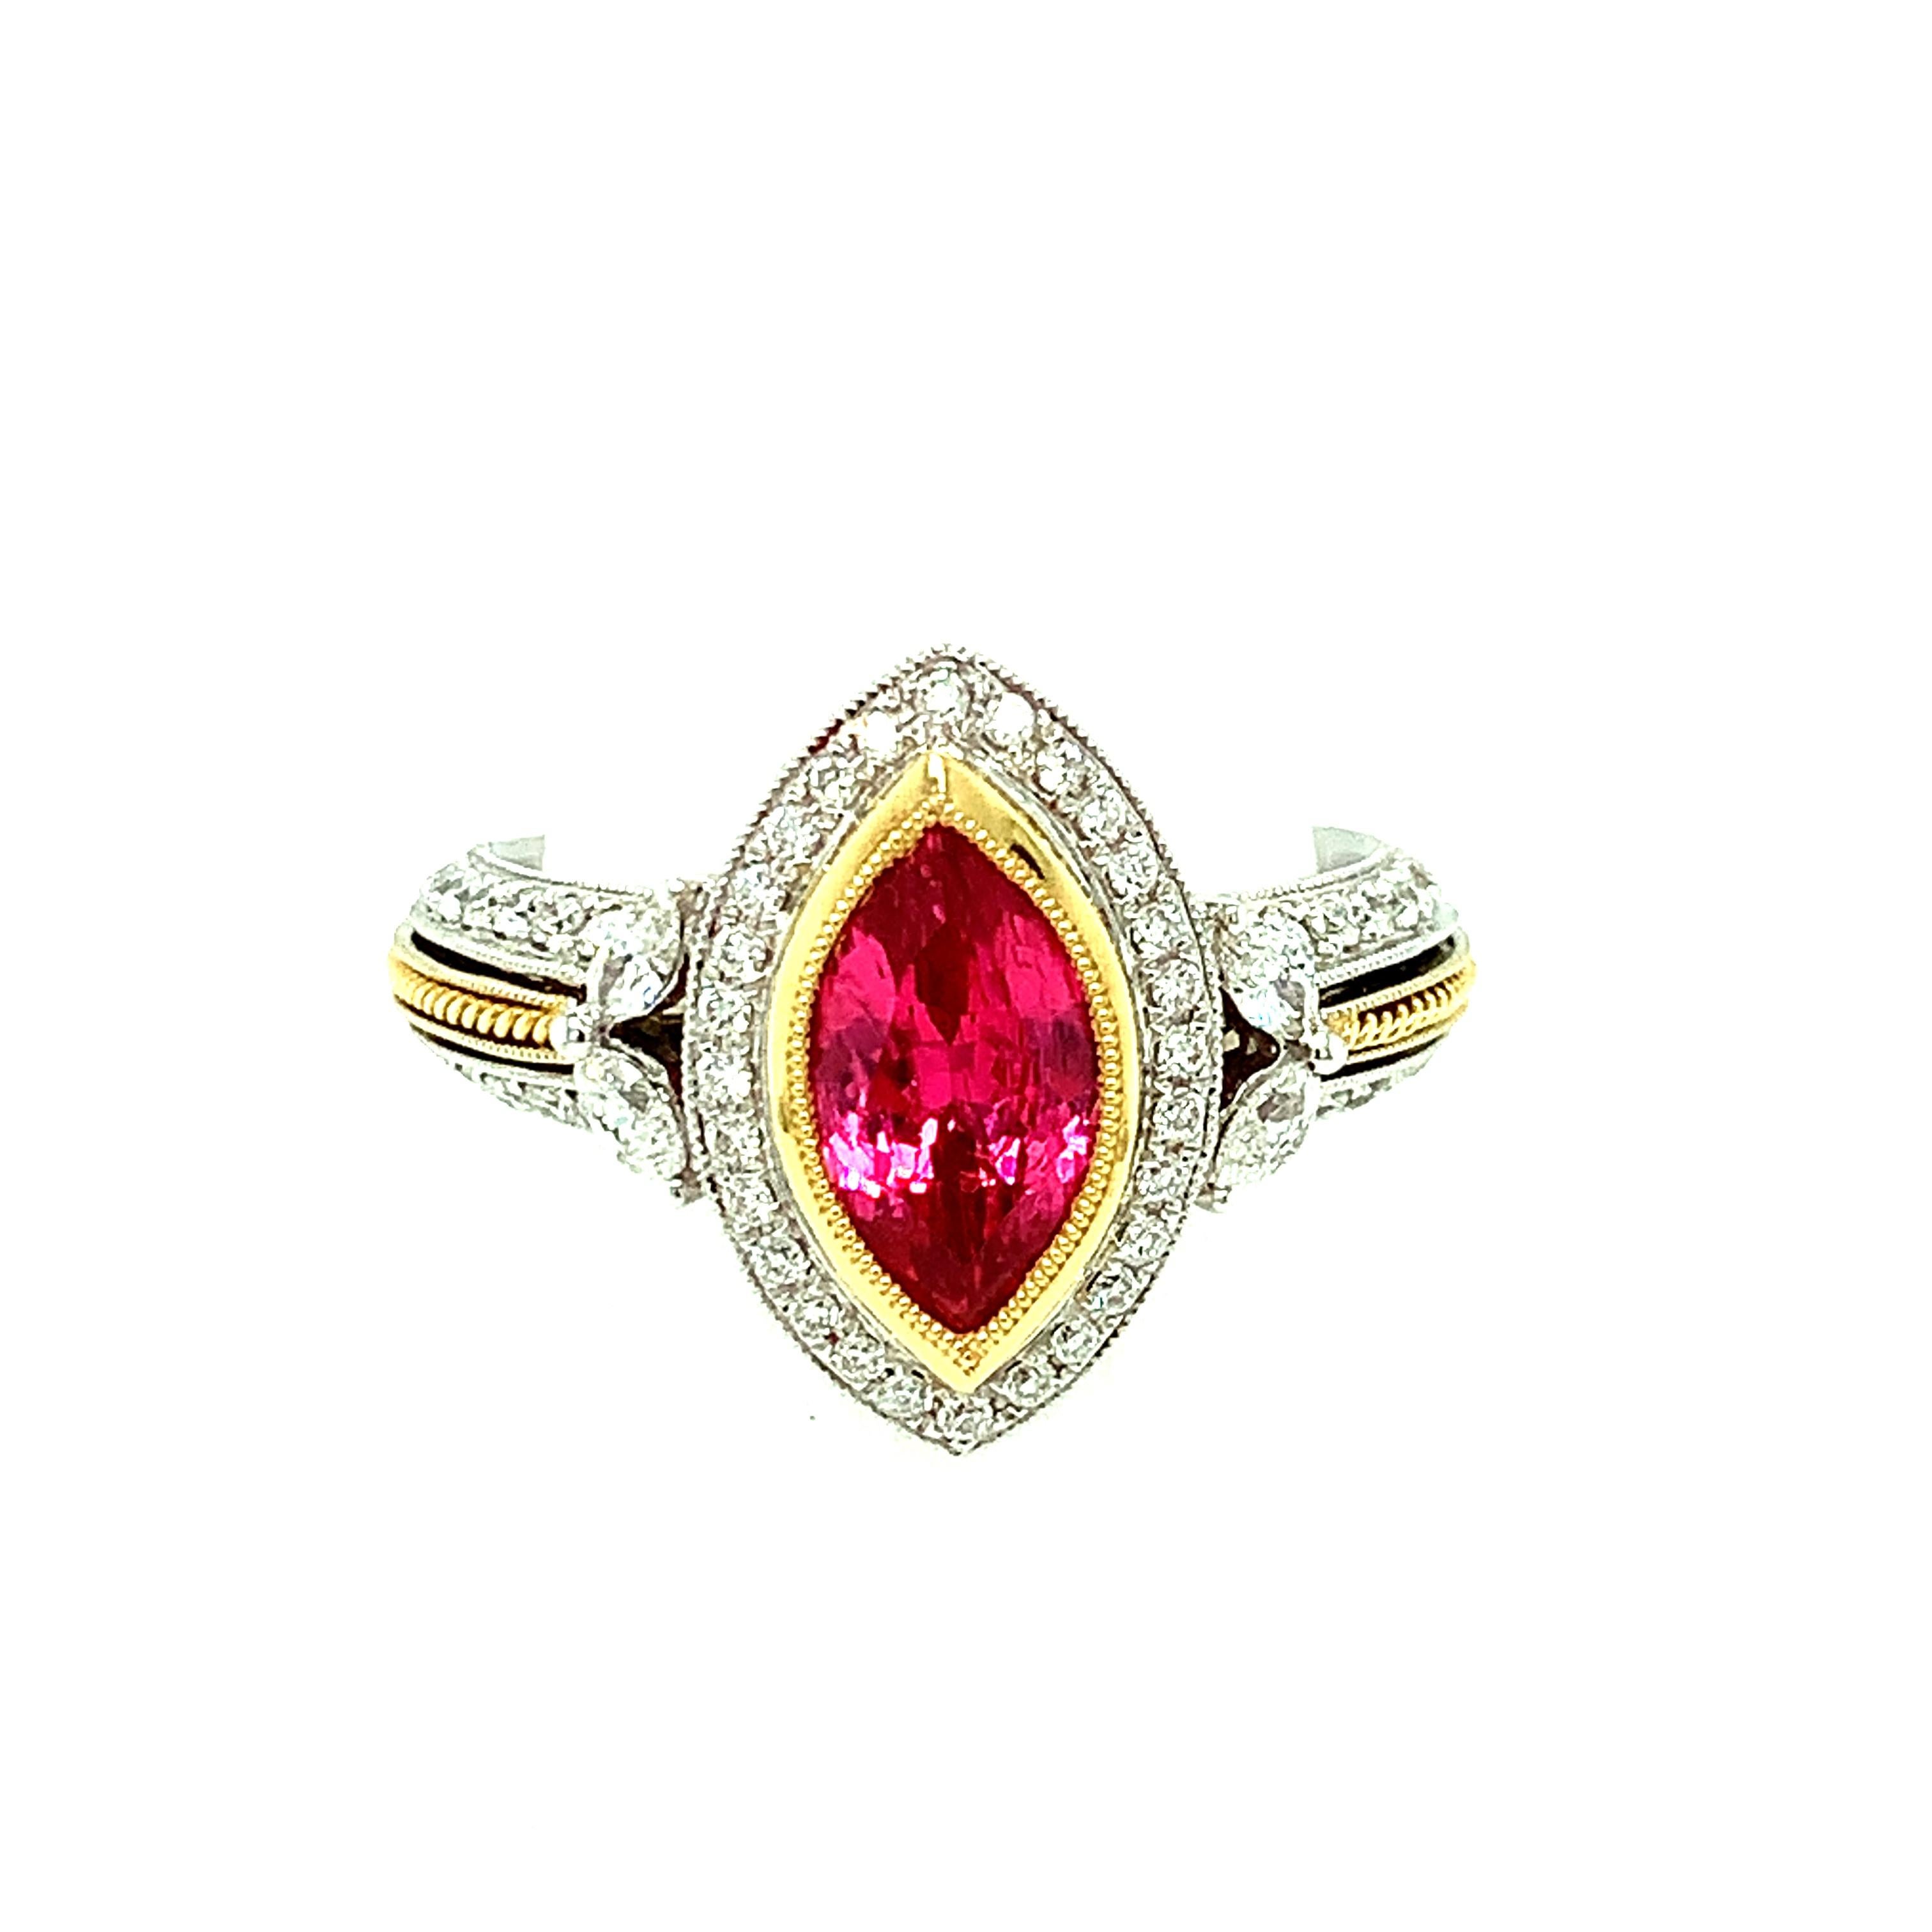 This intricately designed, two-toned cocktail ring features an unusual center stone - a marquise shaped, gem-quality hot fuchsia pink spinel! Marquise shaped spinels are a rare find, as the rough crystals generally do not lend themselves to